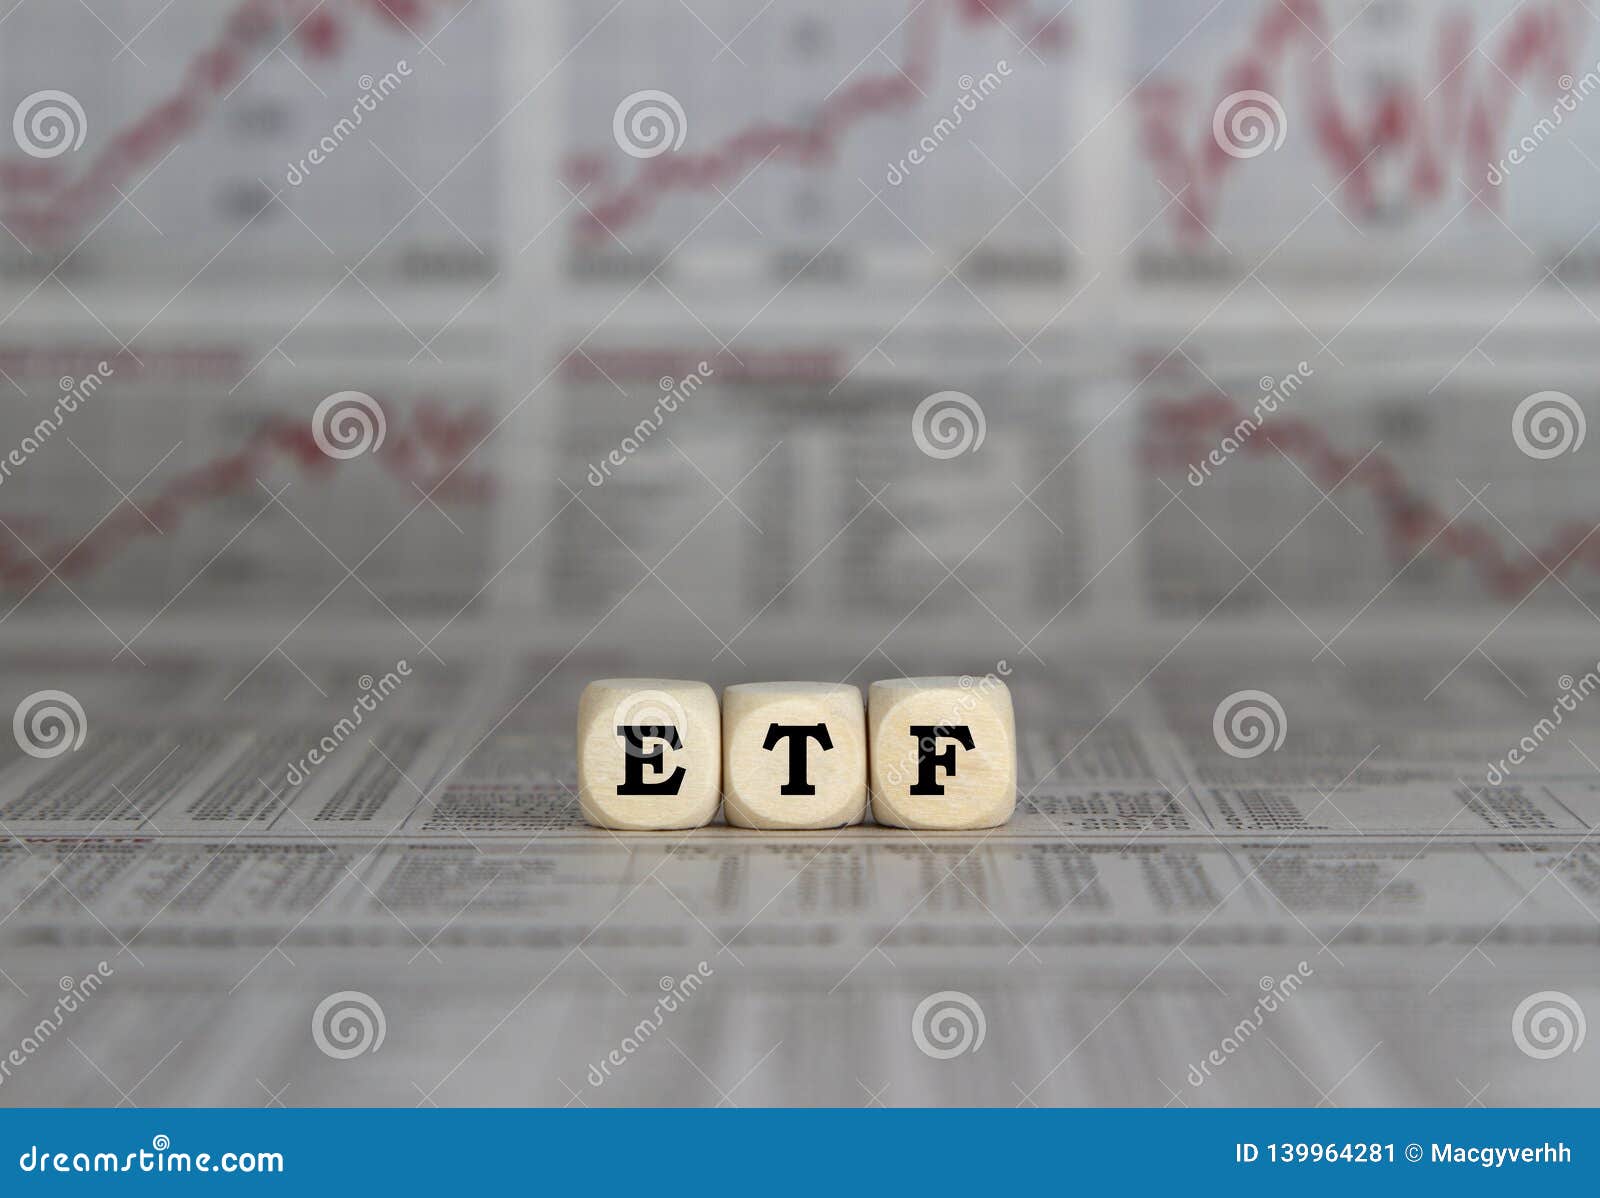 etf exchange trades funds